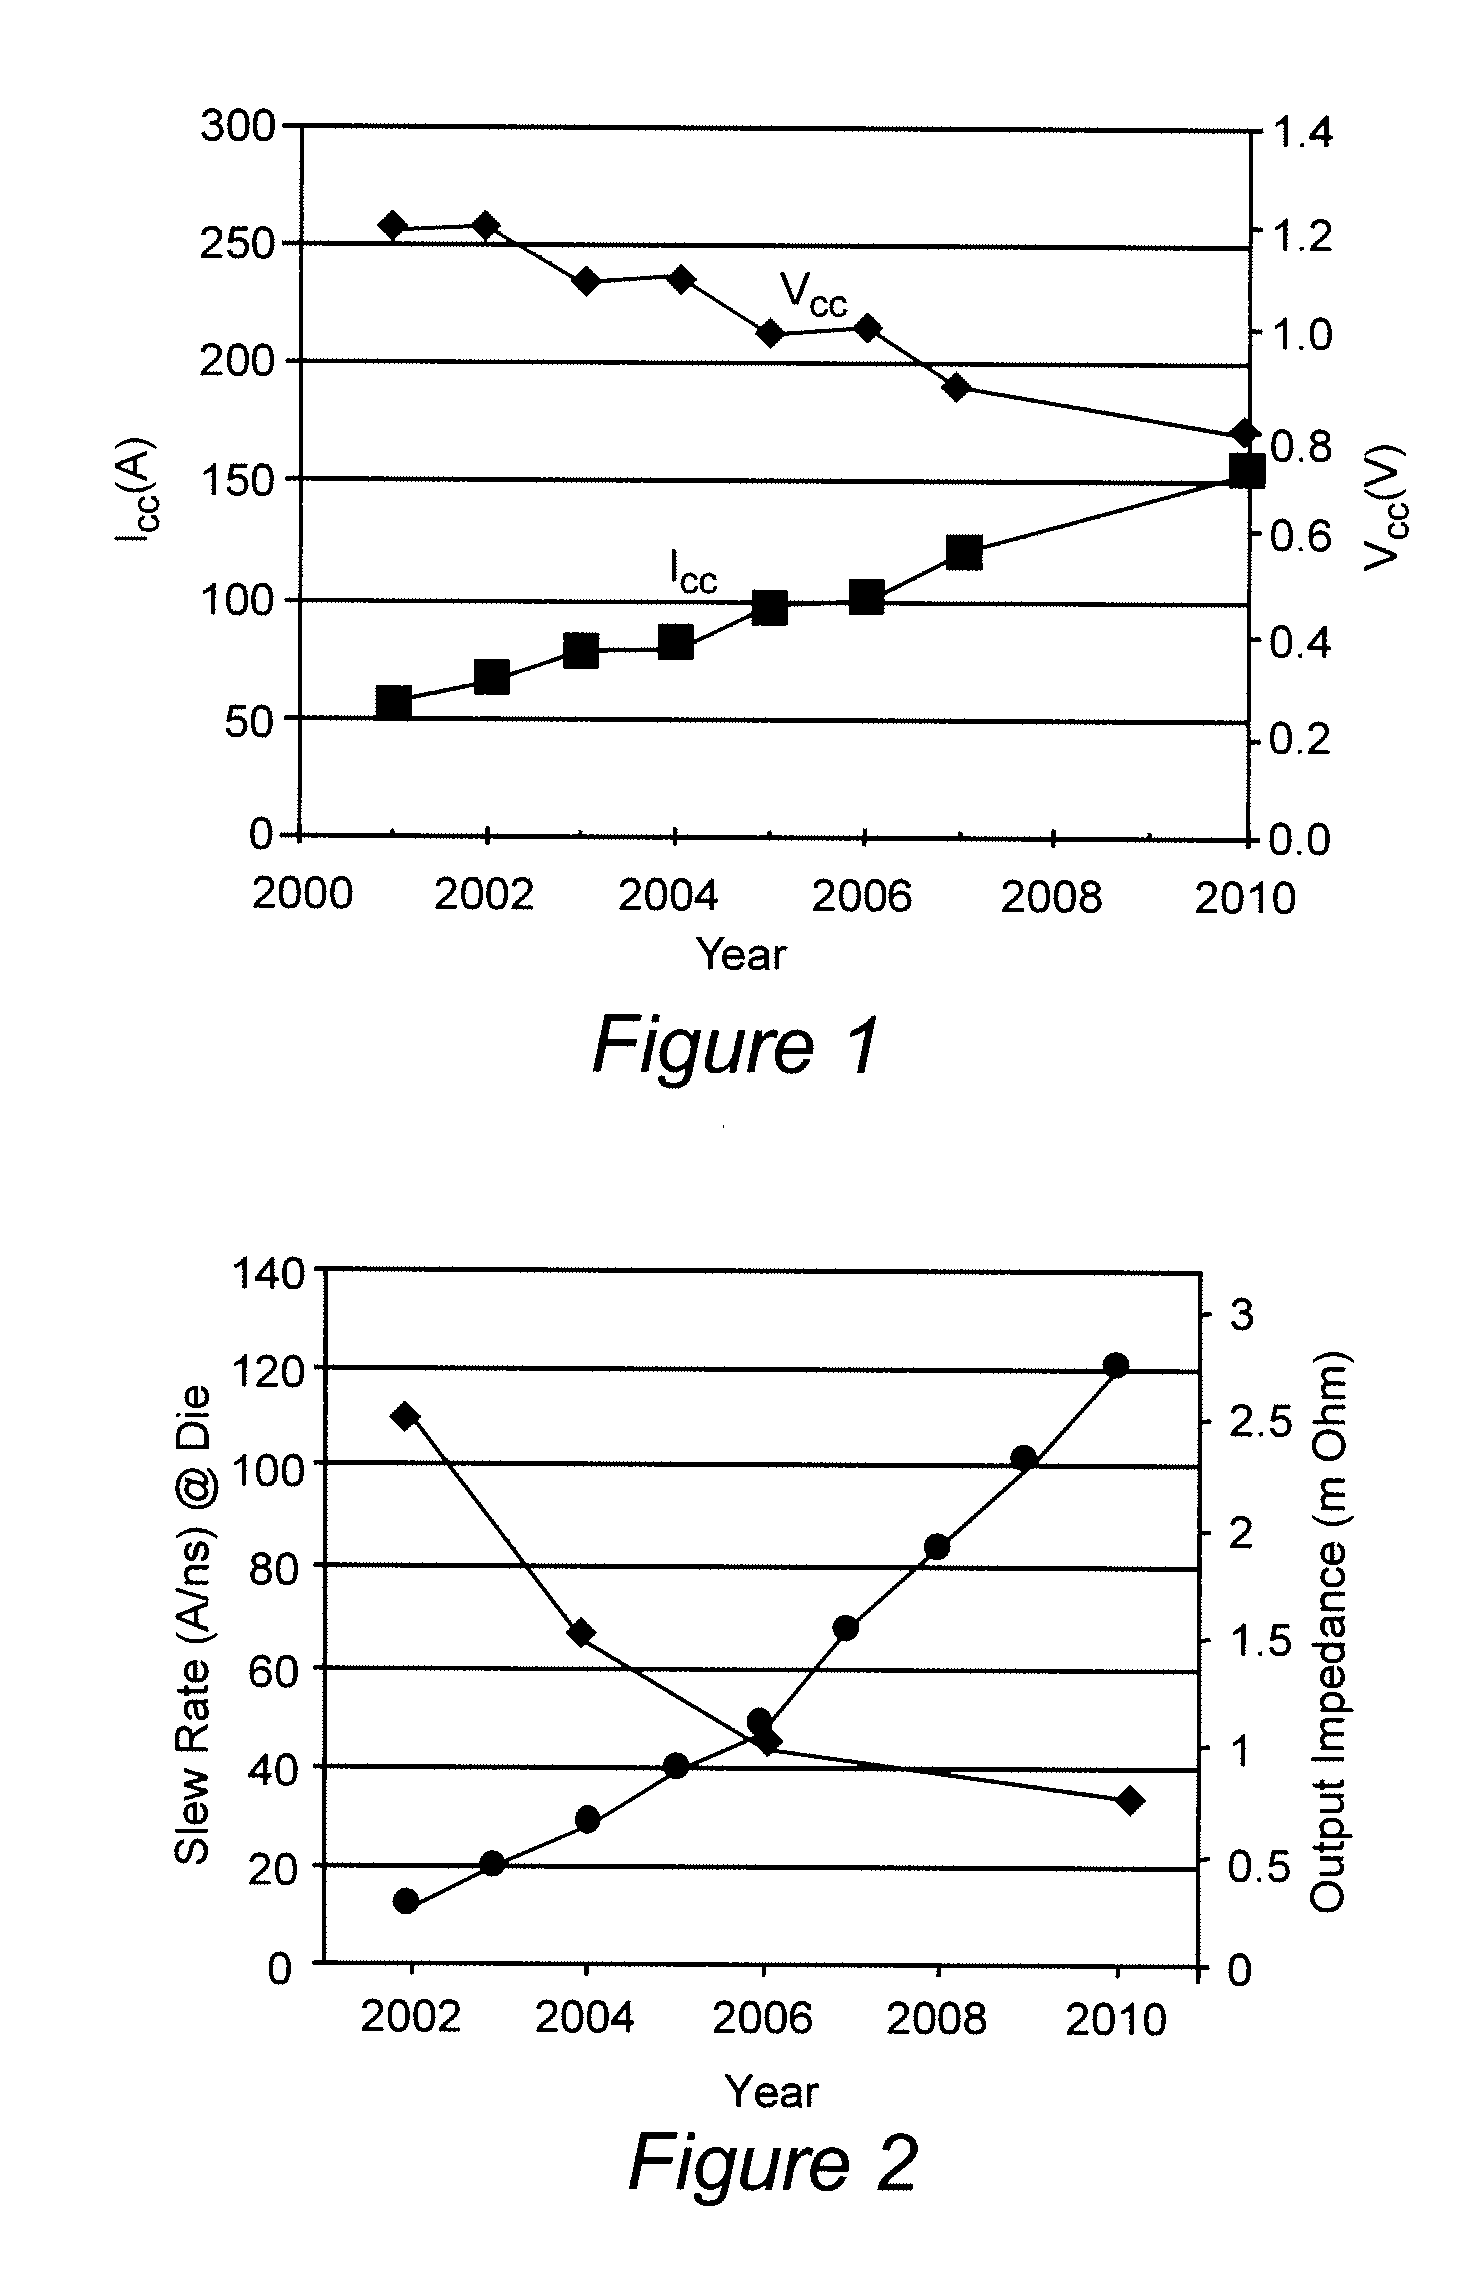 Hybrid Filter for High Slew Rate Output Current Application